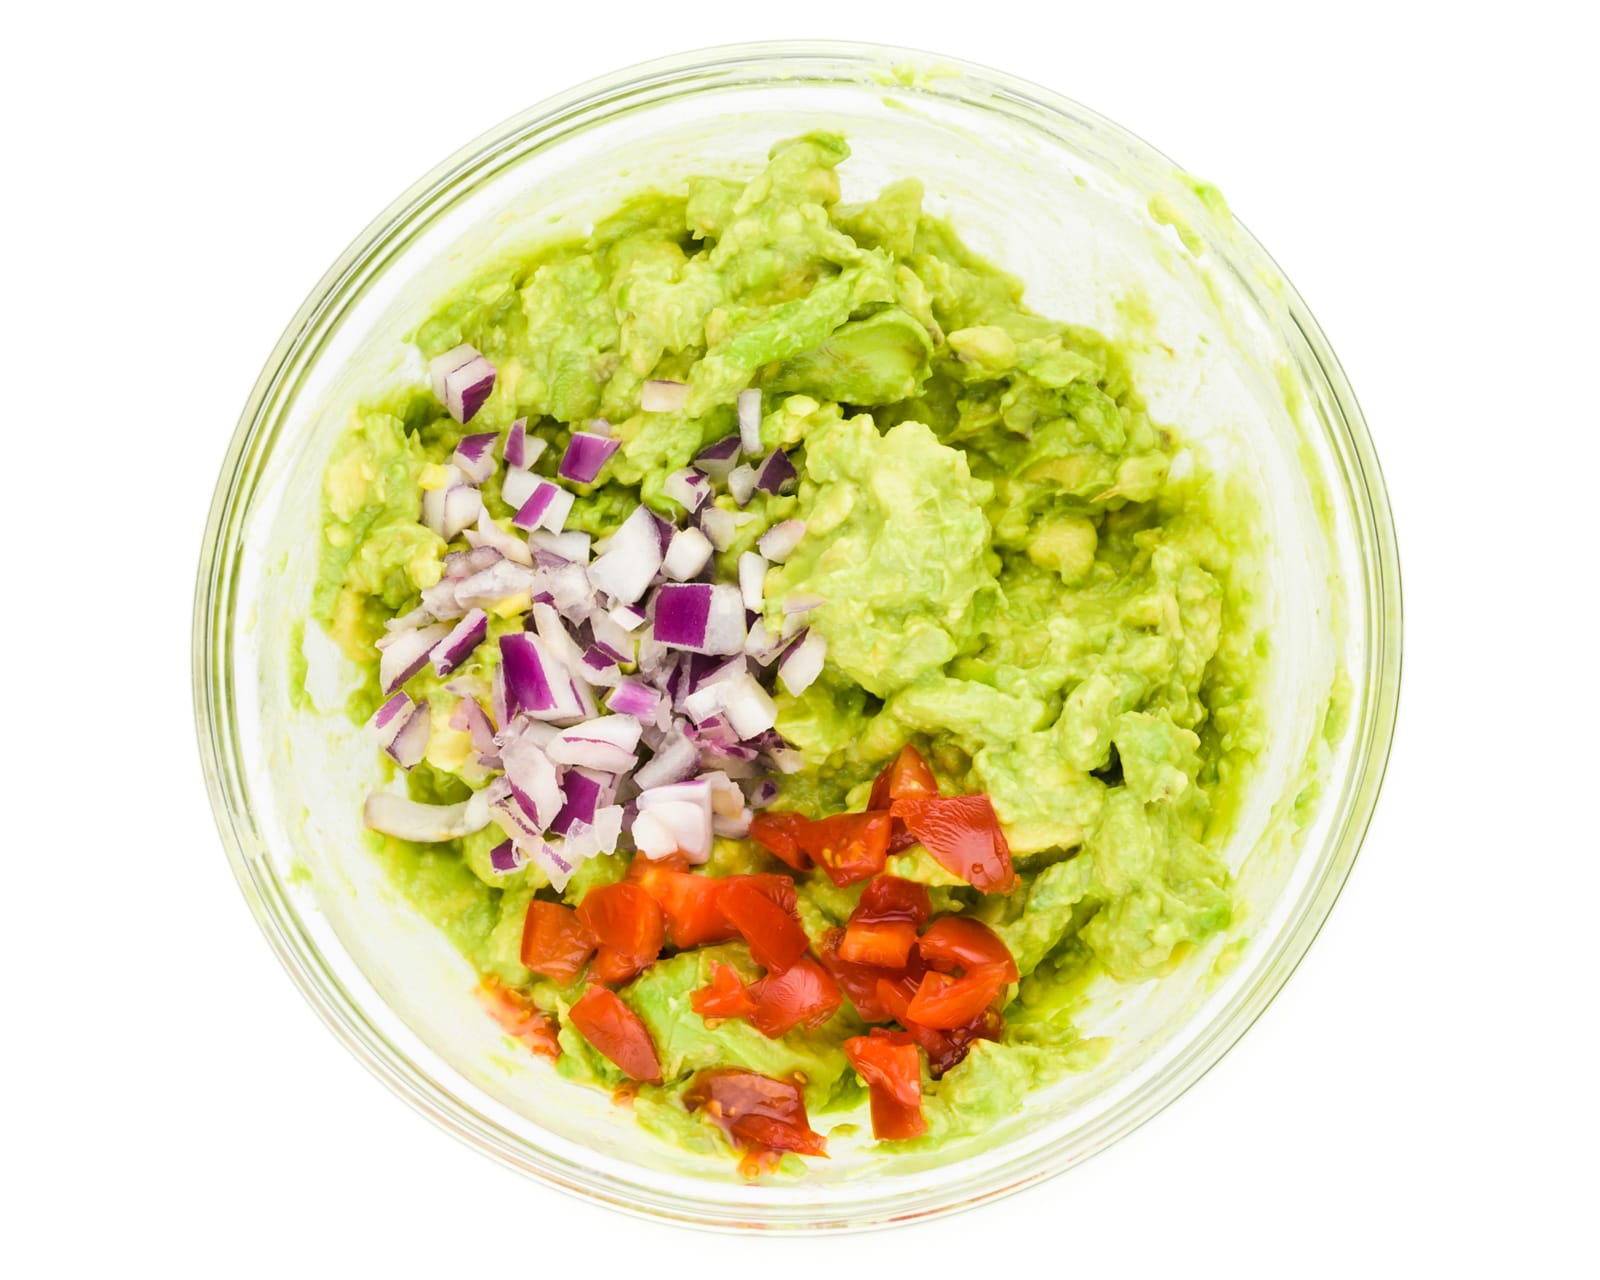 Chopped red onions and chopped cherry tomatoes have been added to mashed avocados.